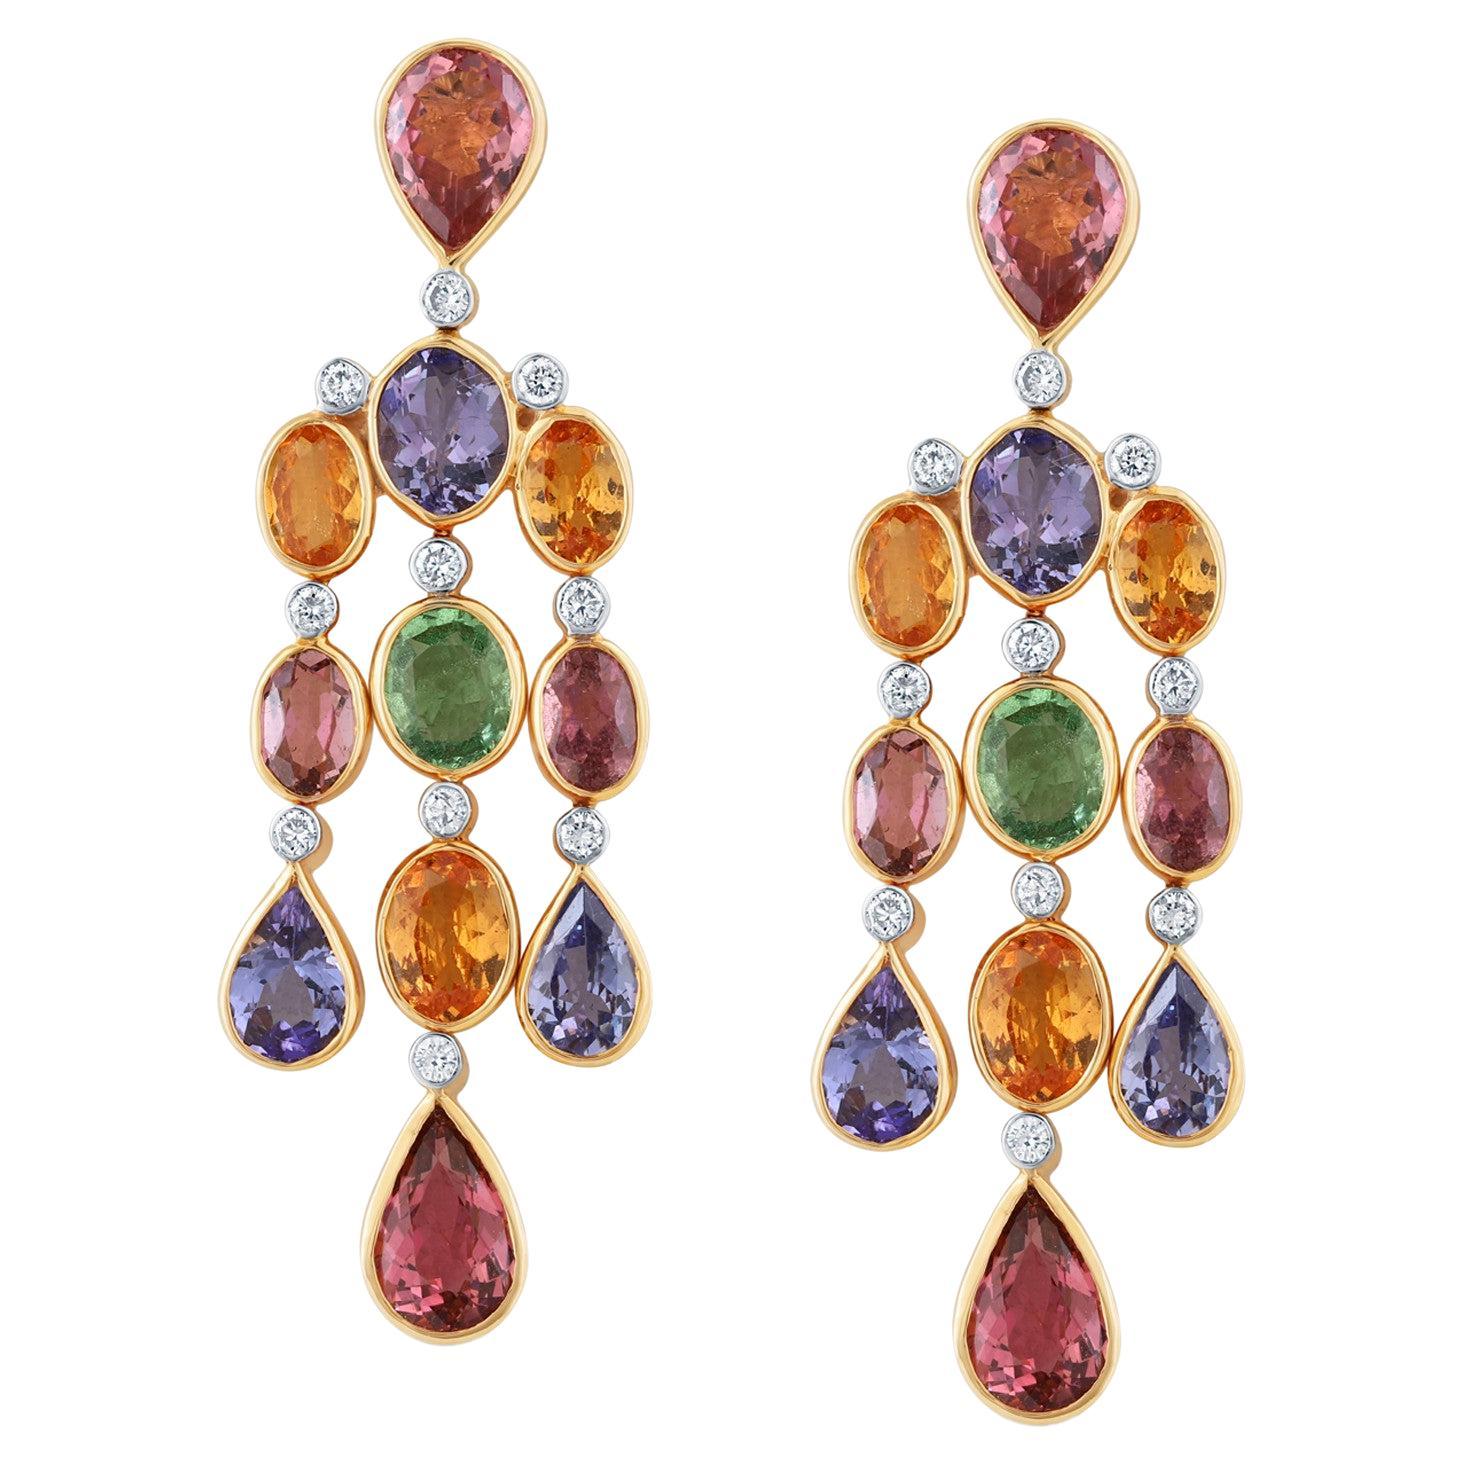 Multicut Tourmaline and Diamond Earring in 18kt Yellow Gold